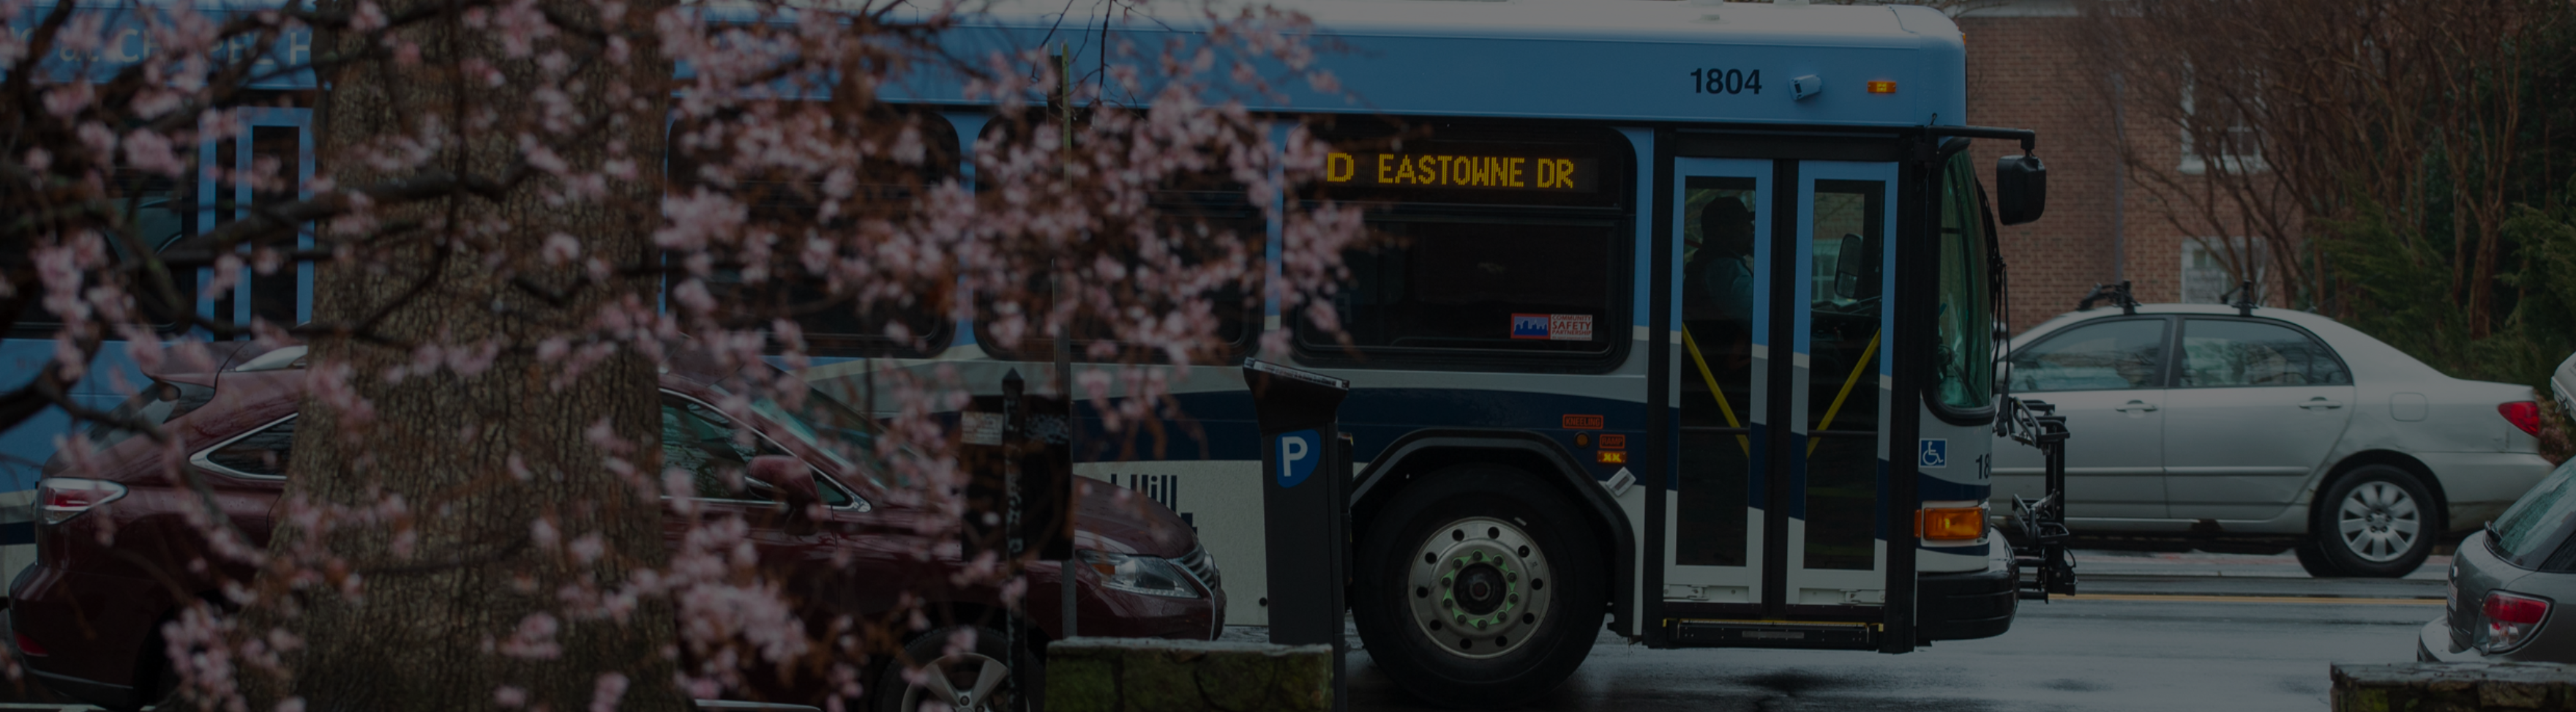 Eastowne Drive Bus Intersection